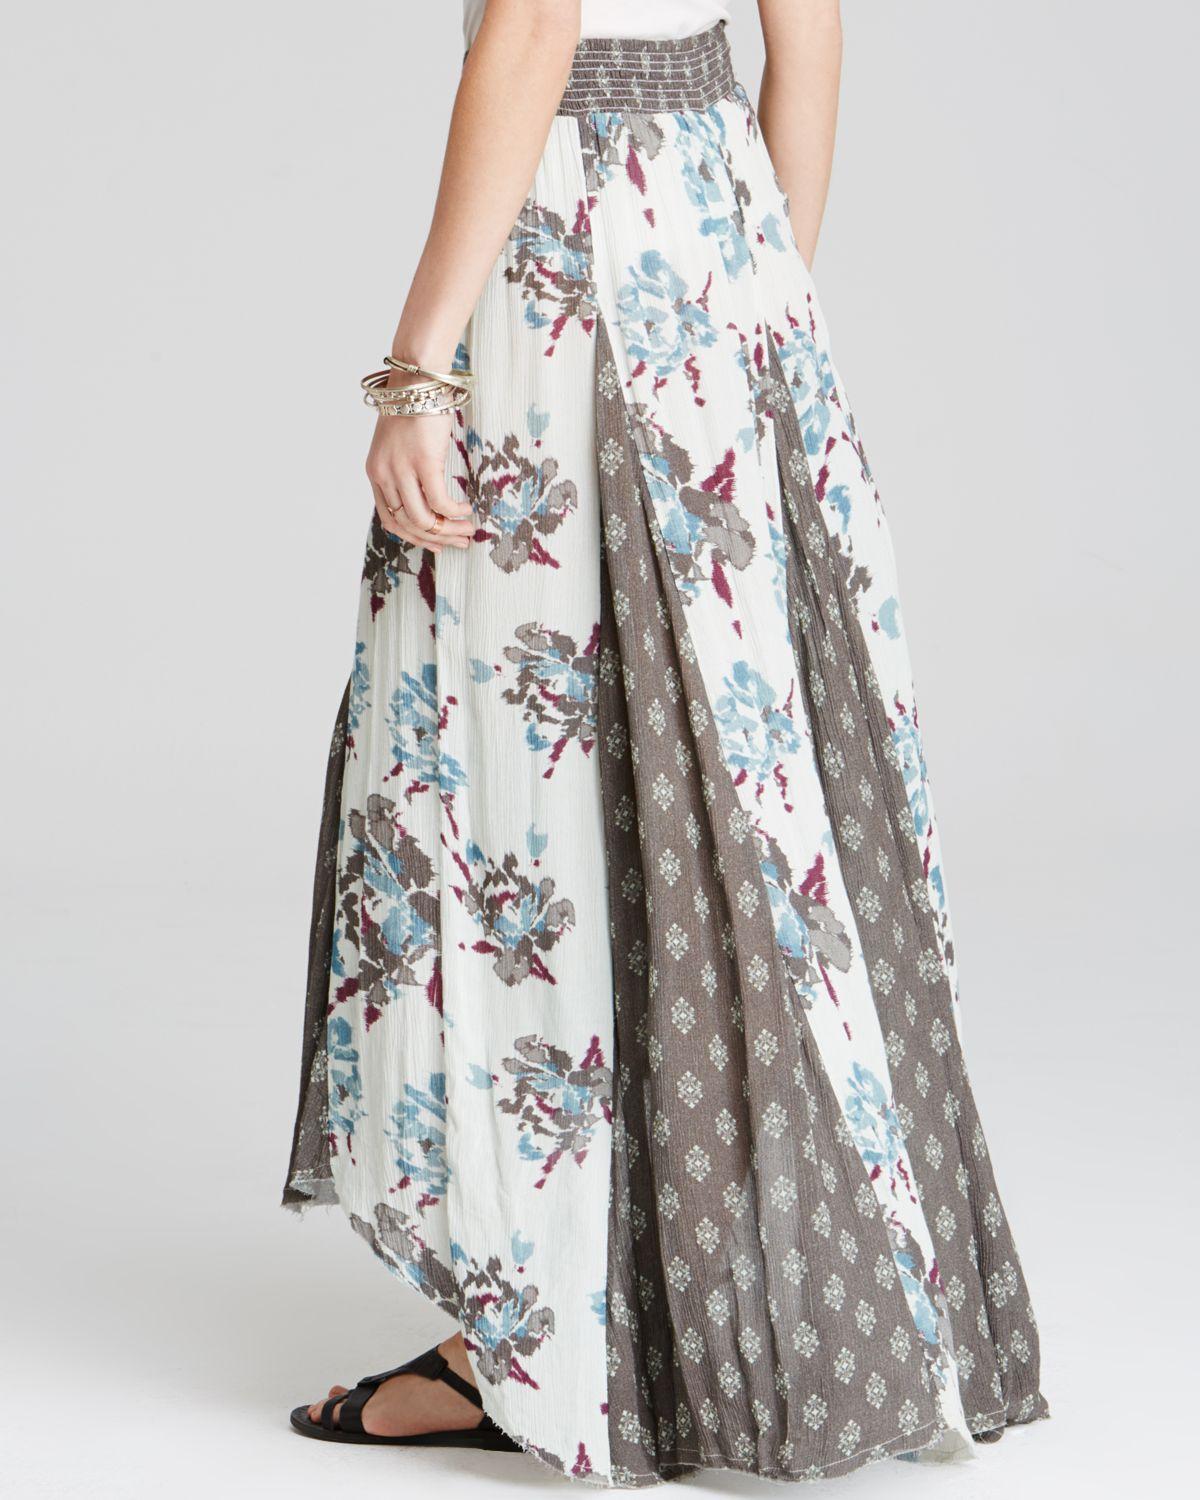 Credentials frozen plan Free People Maxi Skirt - Show Off Your Skirt in Green | Lyst